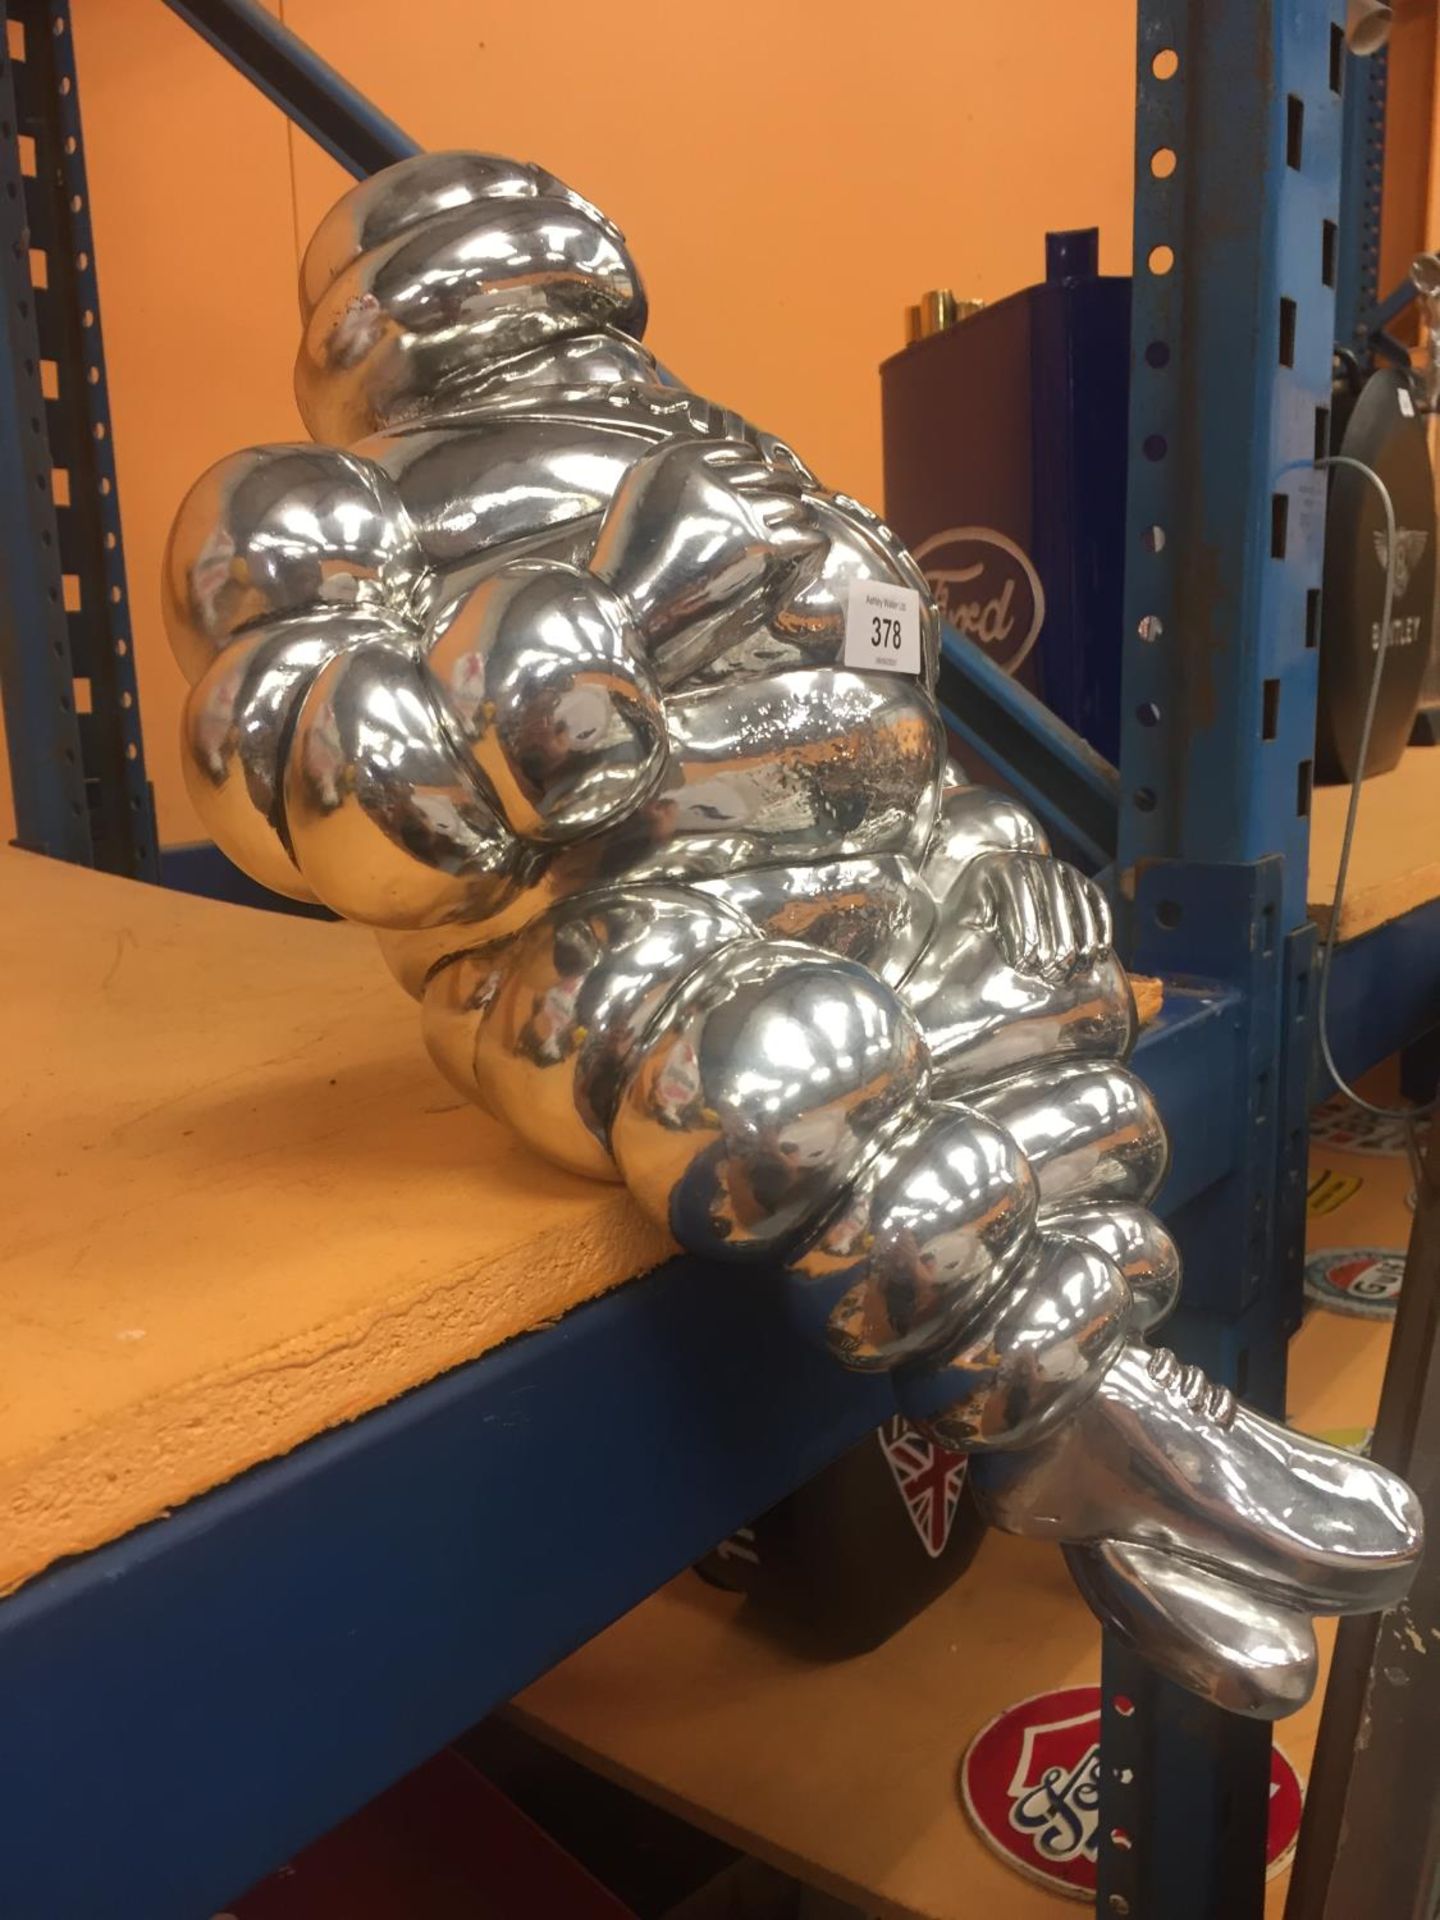 A CHROME SHELF PUPPET OF MICHELIN MAN - Image 3 of 3